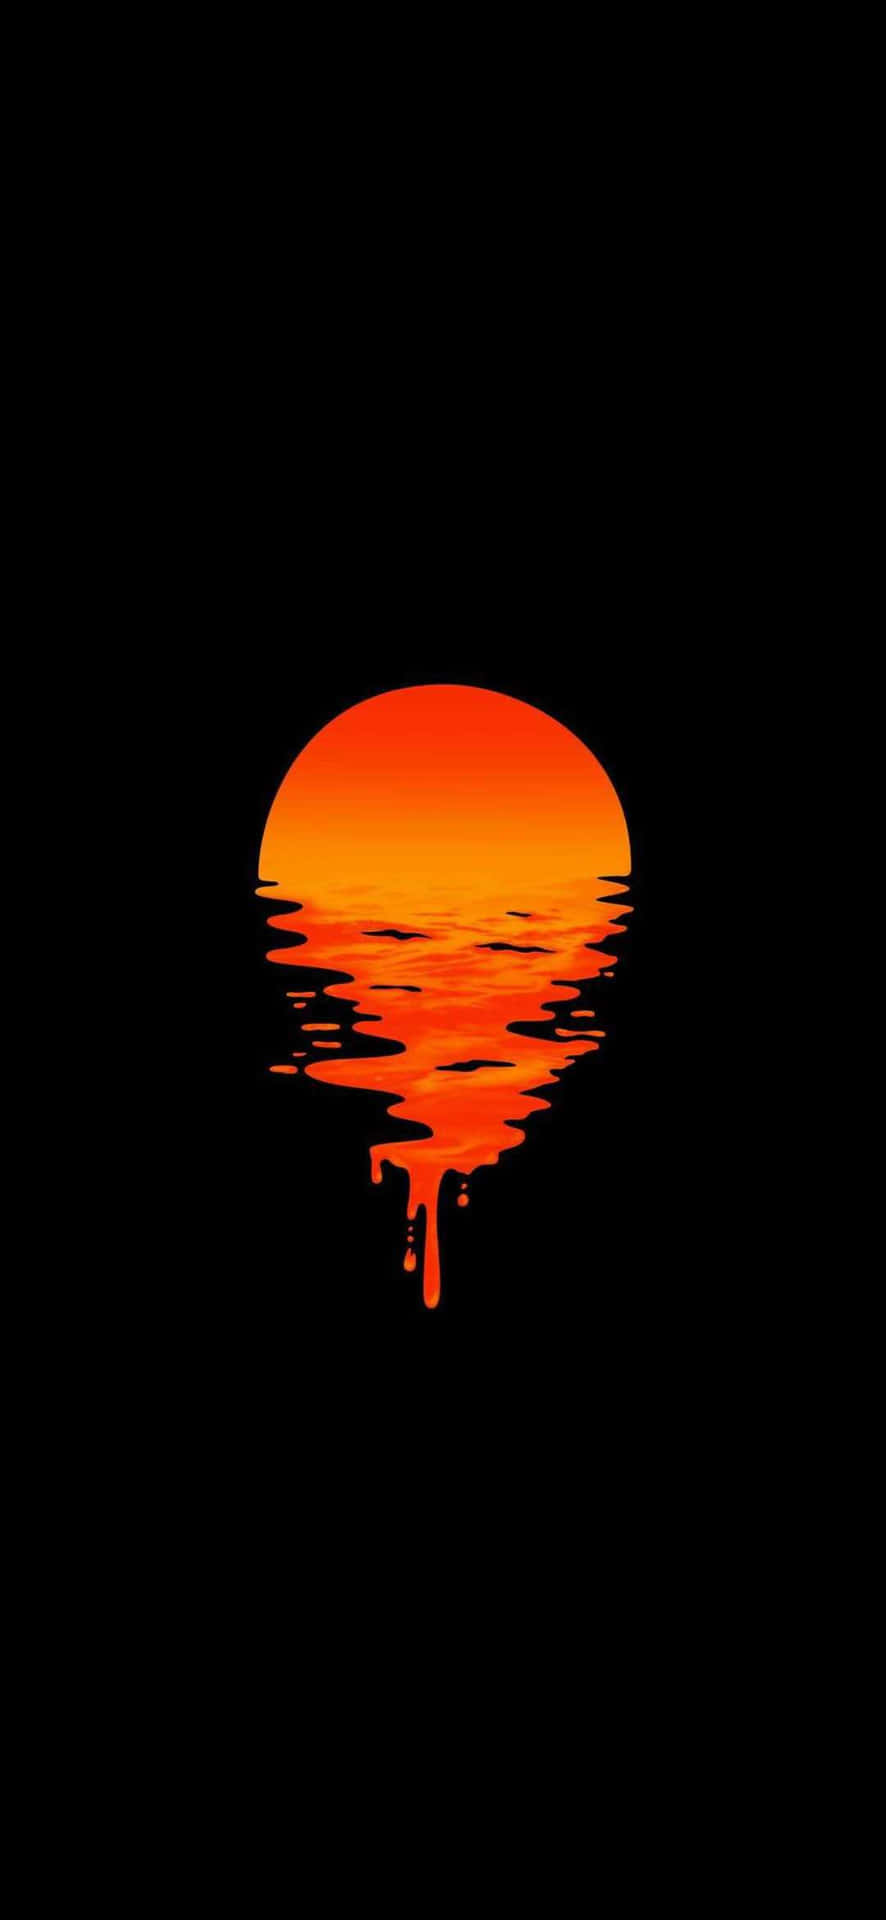 A Sunset With A Black Background Wallpaper